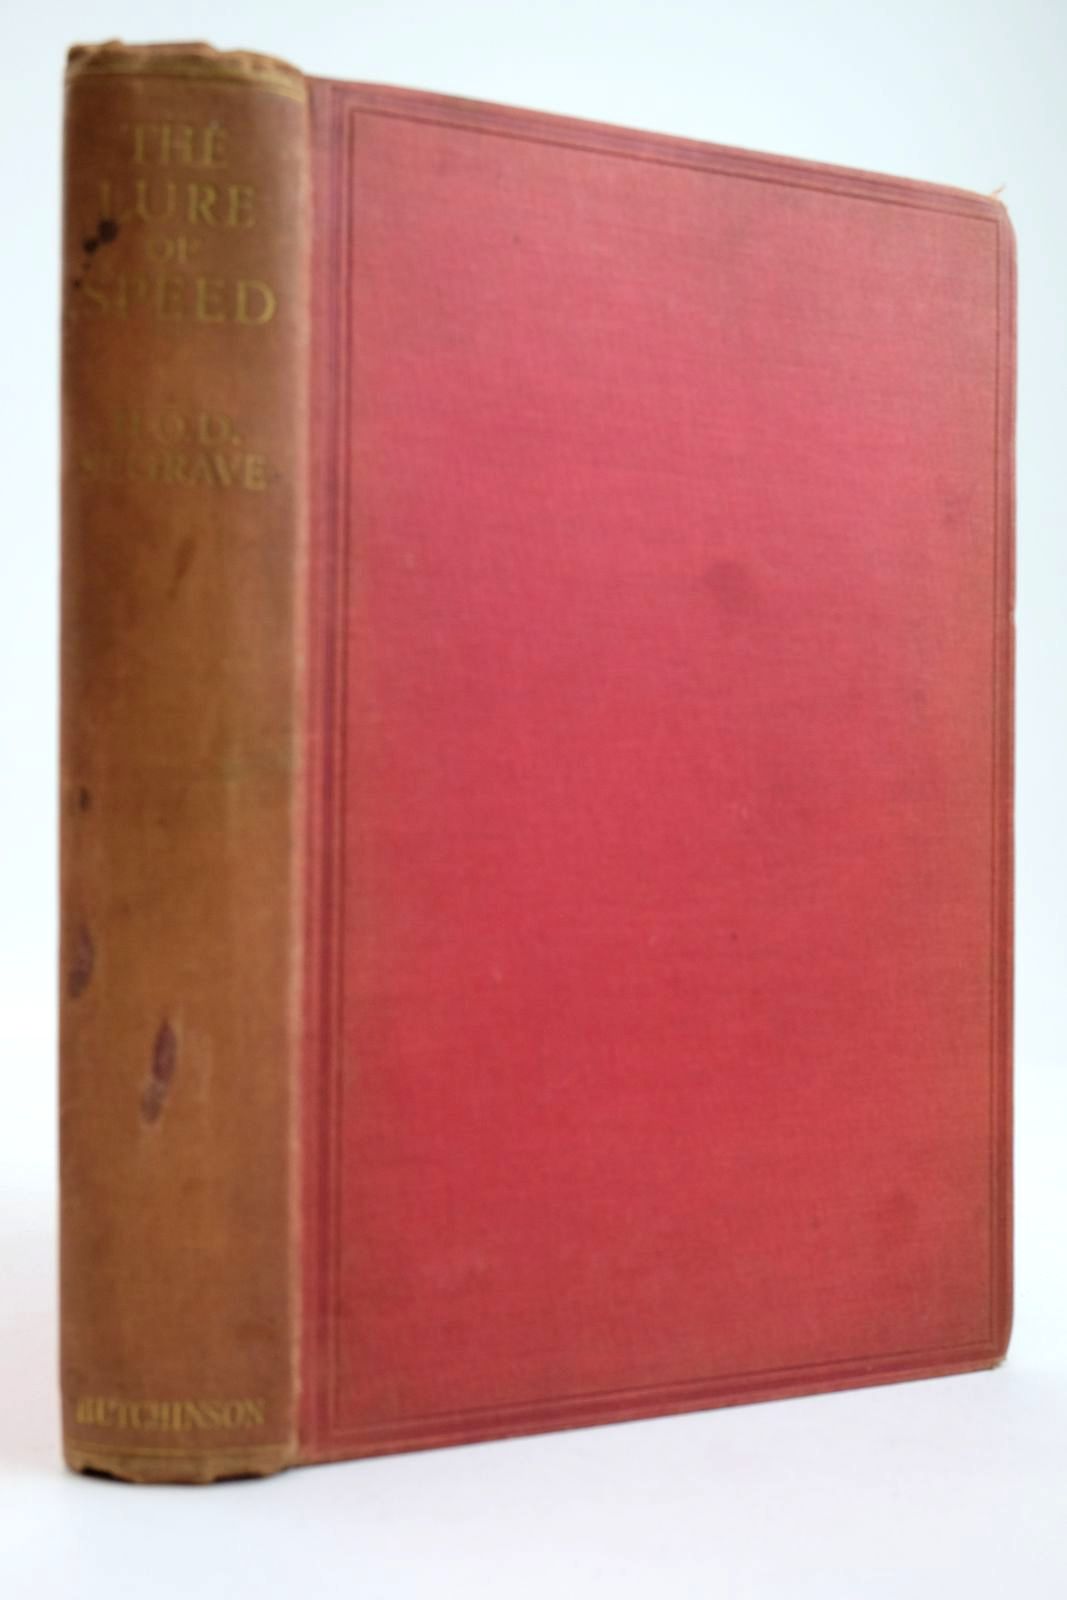 Photo of THE LURE OF SPEED written by Segrave, Henry published by Hutchinson (STOCK CODE: 2133952)  for sale by Stella & Rose's Books